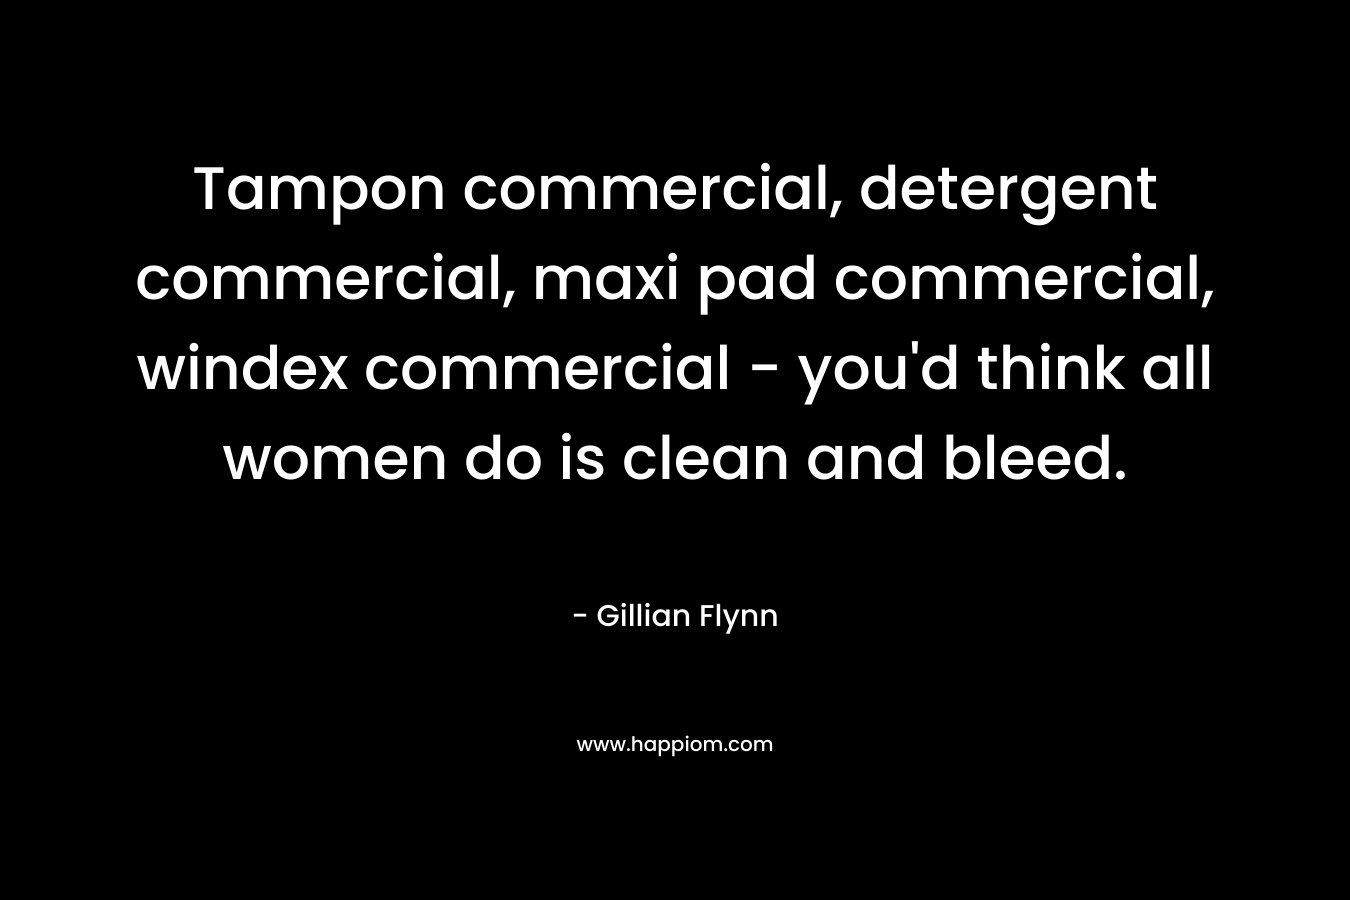 Tampon commercial, detergent commercial, maxi pad commercial, windex commercial – you’d think all women do is clean and bleed. – Gillian Flynn